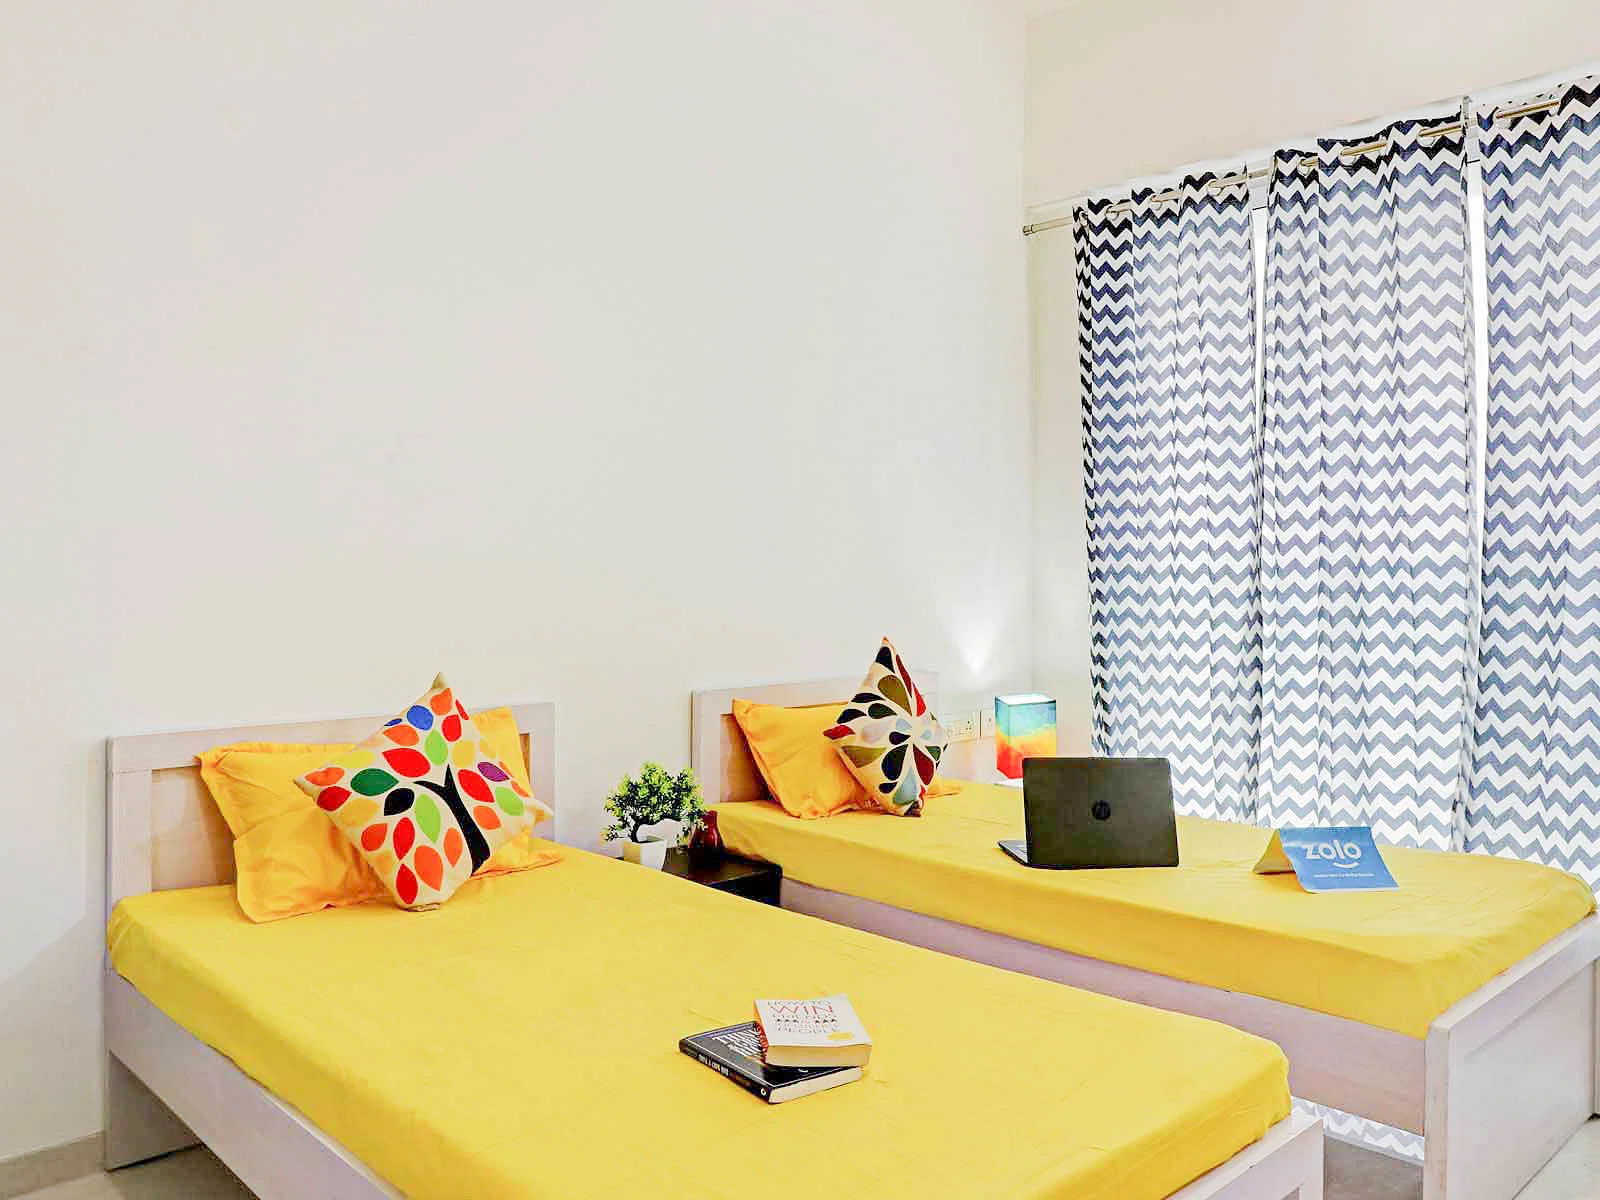 budget-friendly PGs and hostels for gents with single rooms with daily hopusekeeping-Zolo Meadows